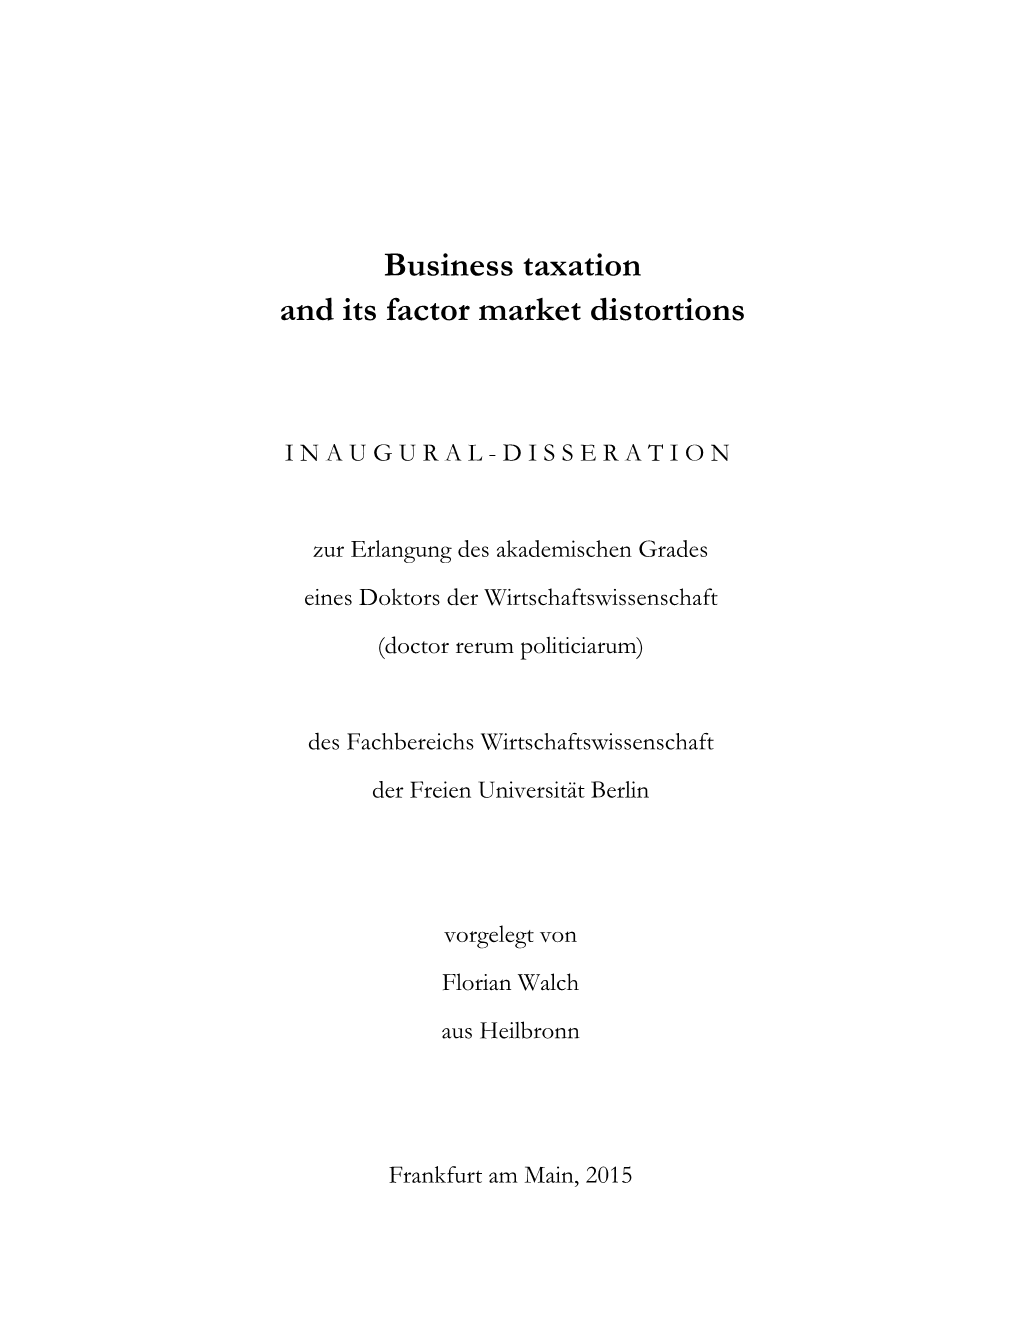 Business Taxation and Its Factor Market Distortions